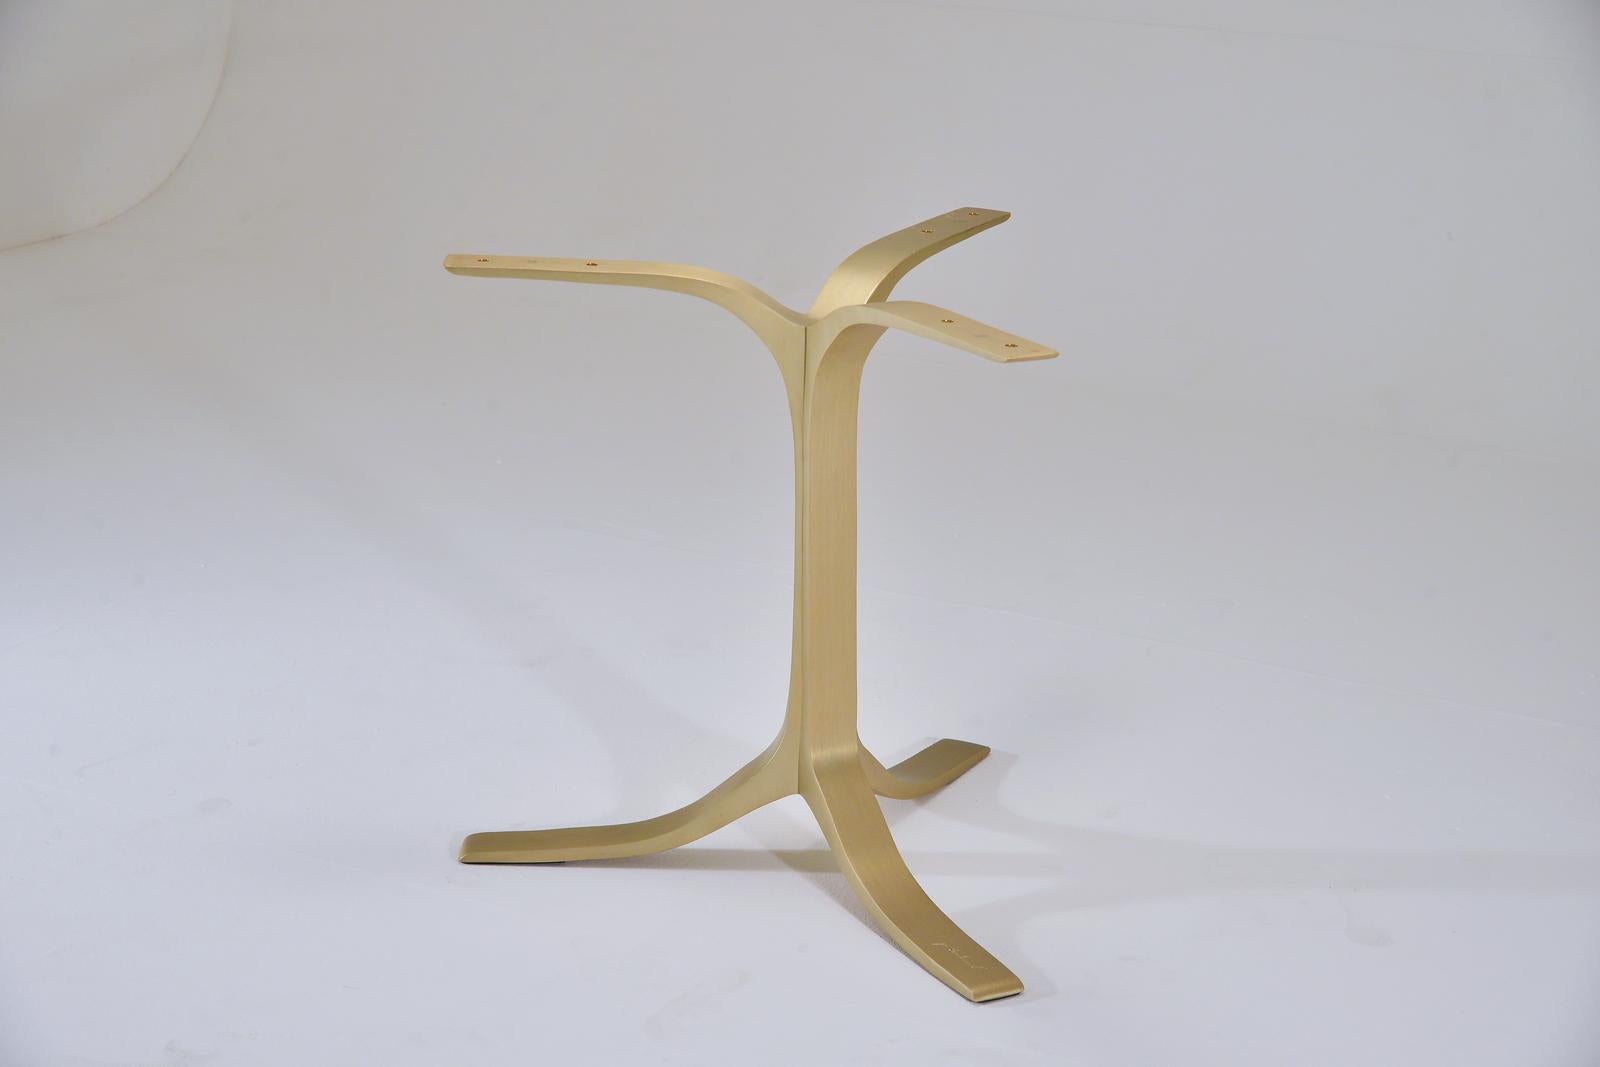 Thai Bespoke Sand-Cast Brass Table Base with Golden Sand Finish PT12 by P. Tendercool For Sale